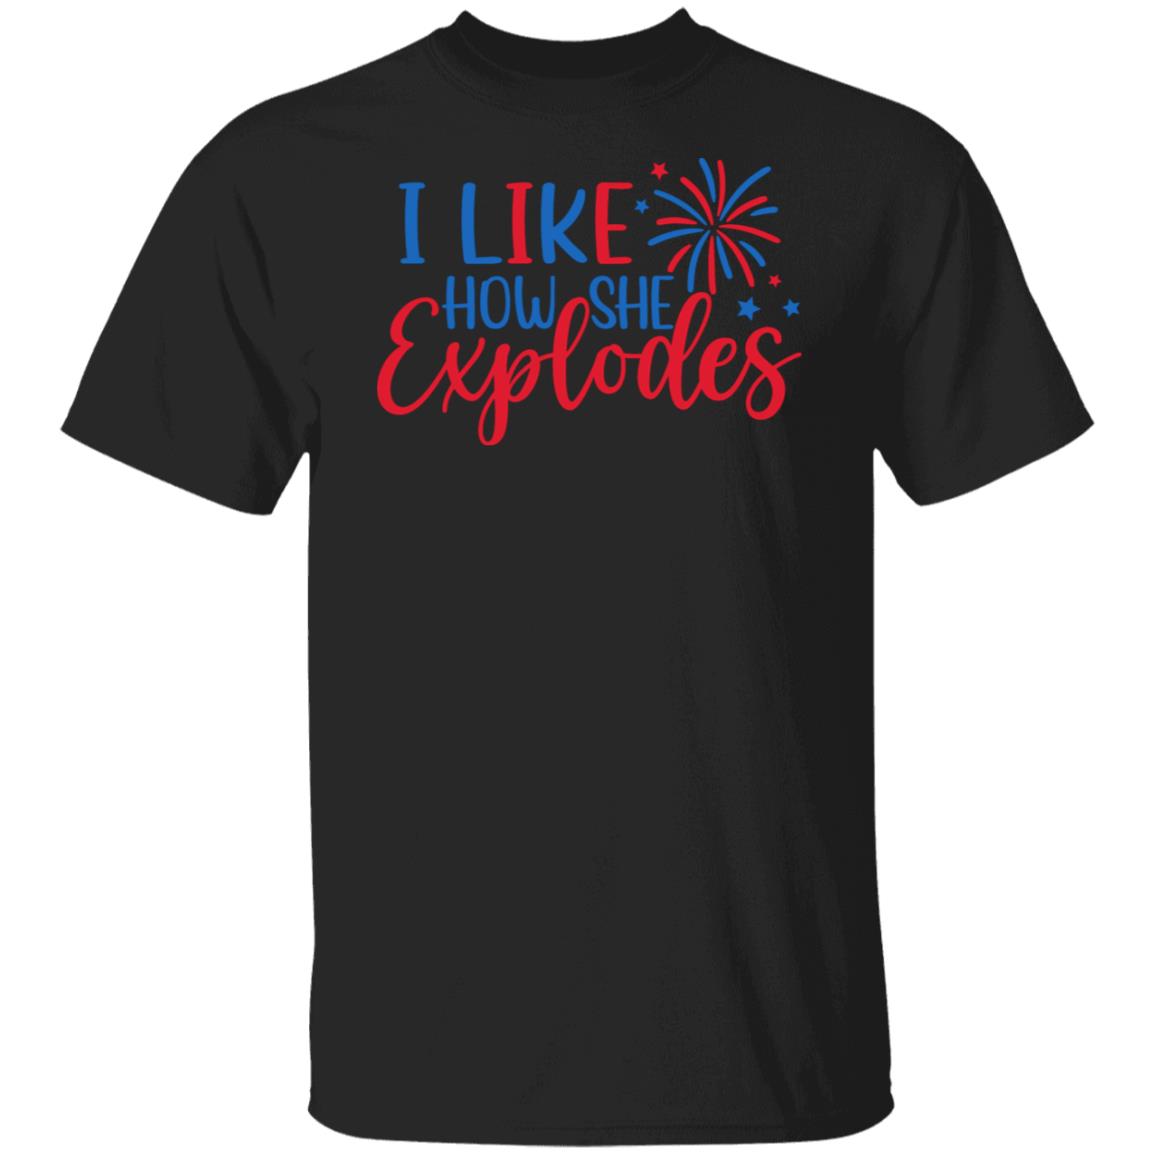 His Hers 4th of July Fireworks Couples T-Shirt